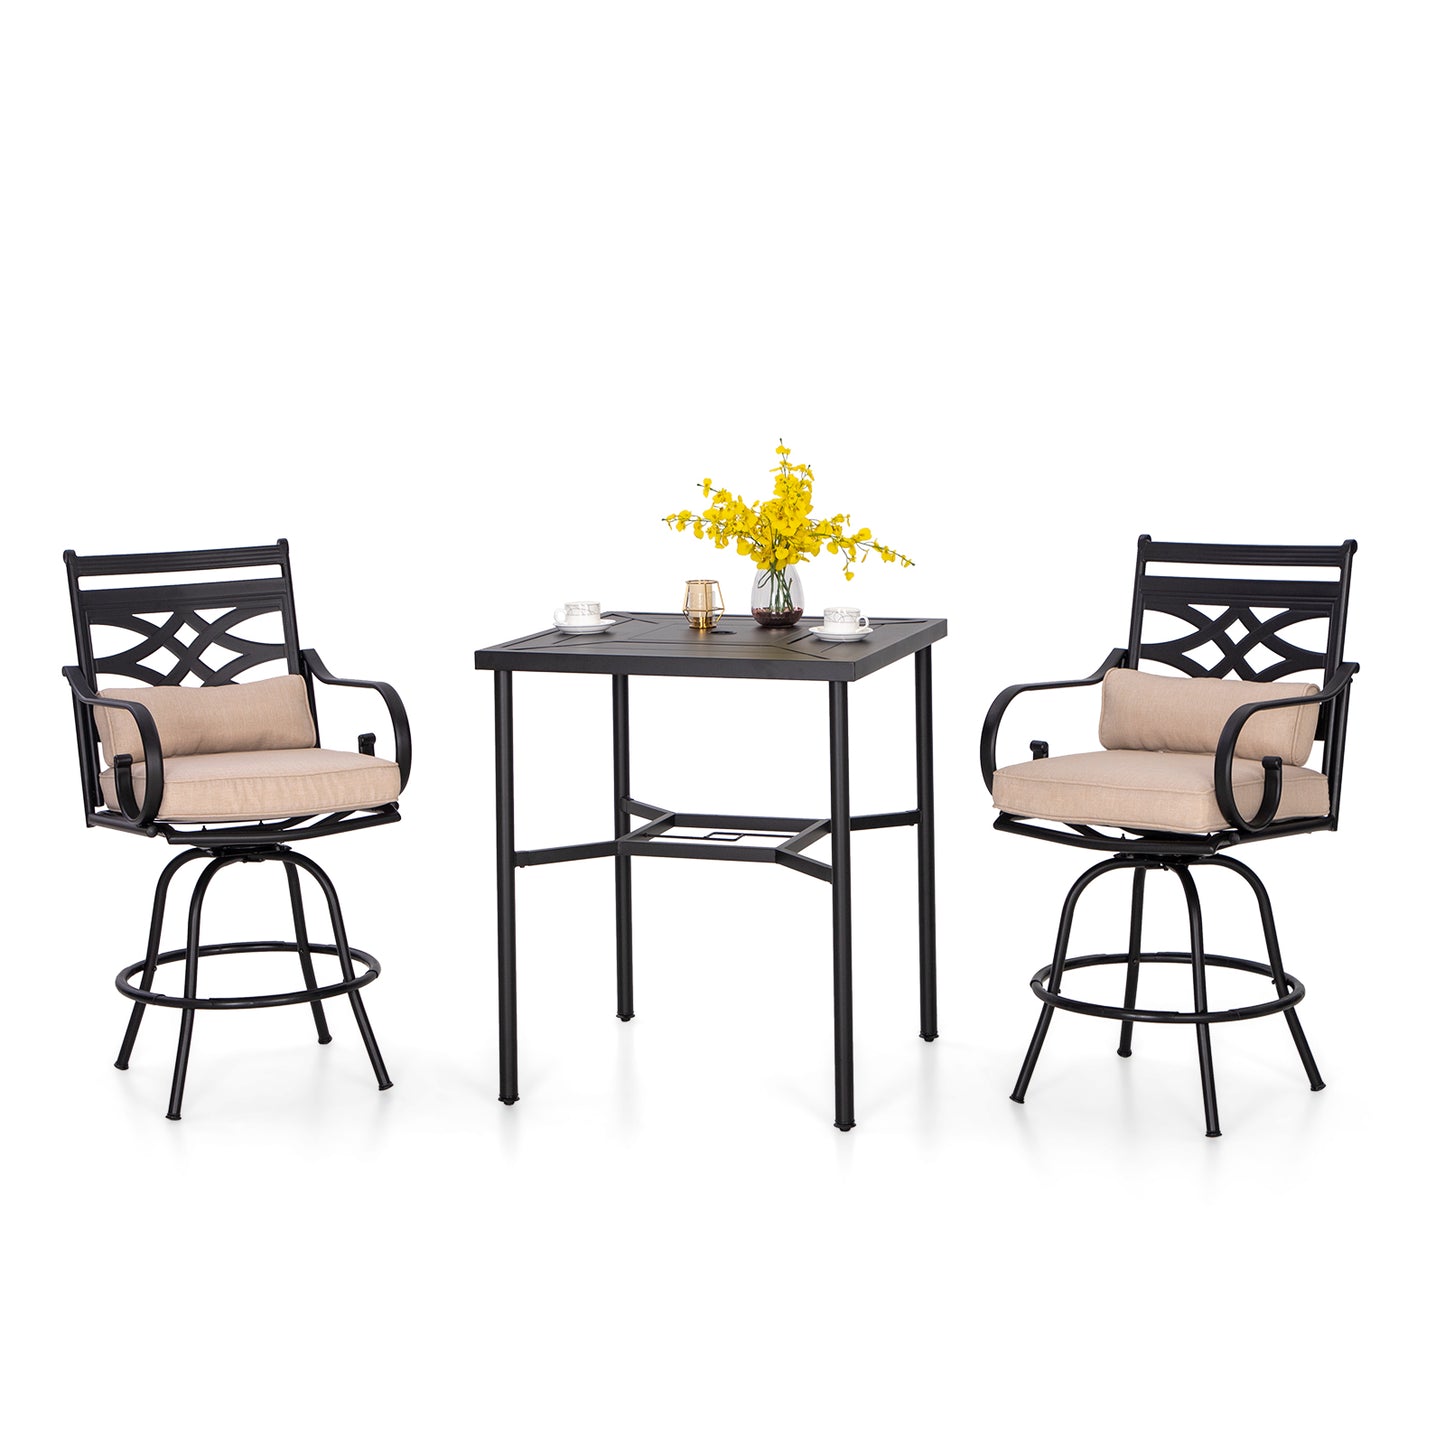 Sophia & William 3 Pieces Outdoor Bar Stools Set with 2 Bar Stools and Metal Bar Table